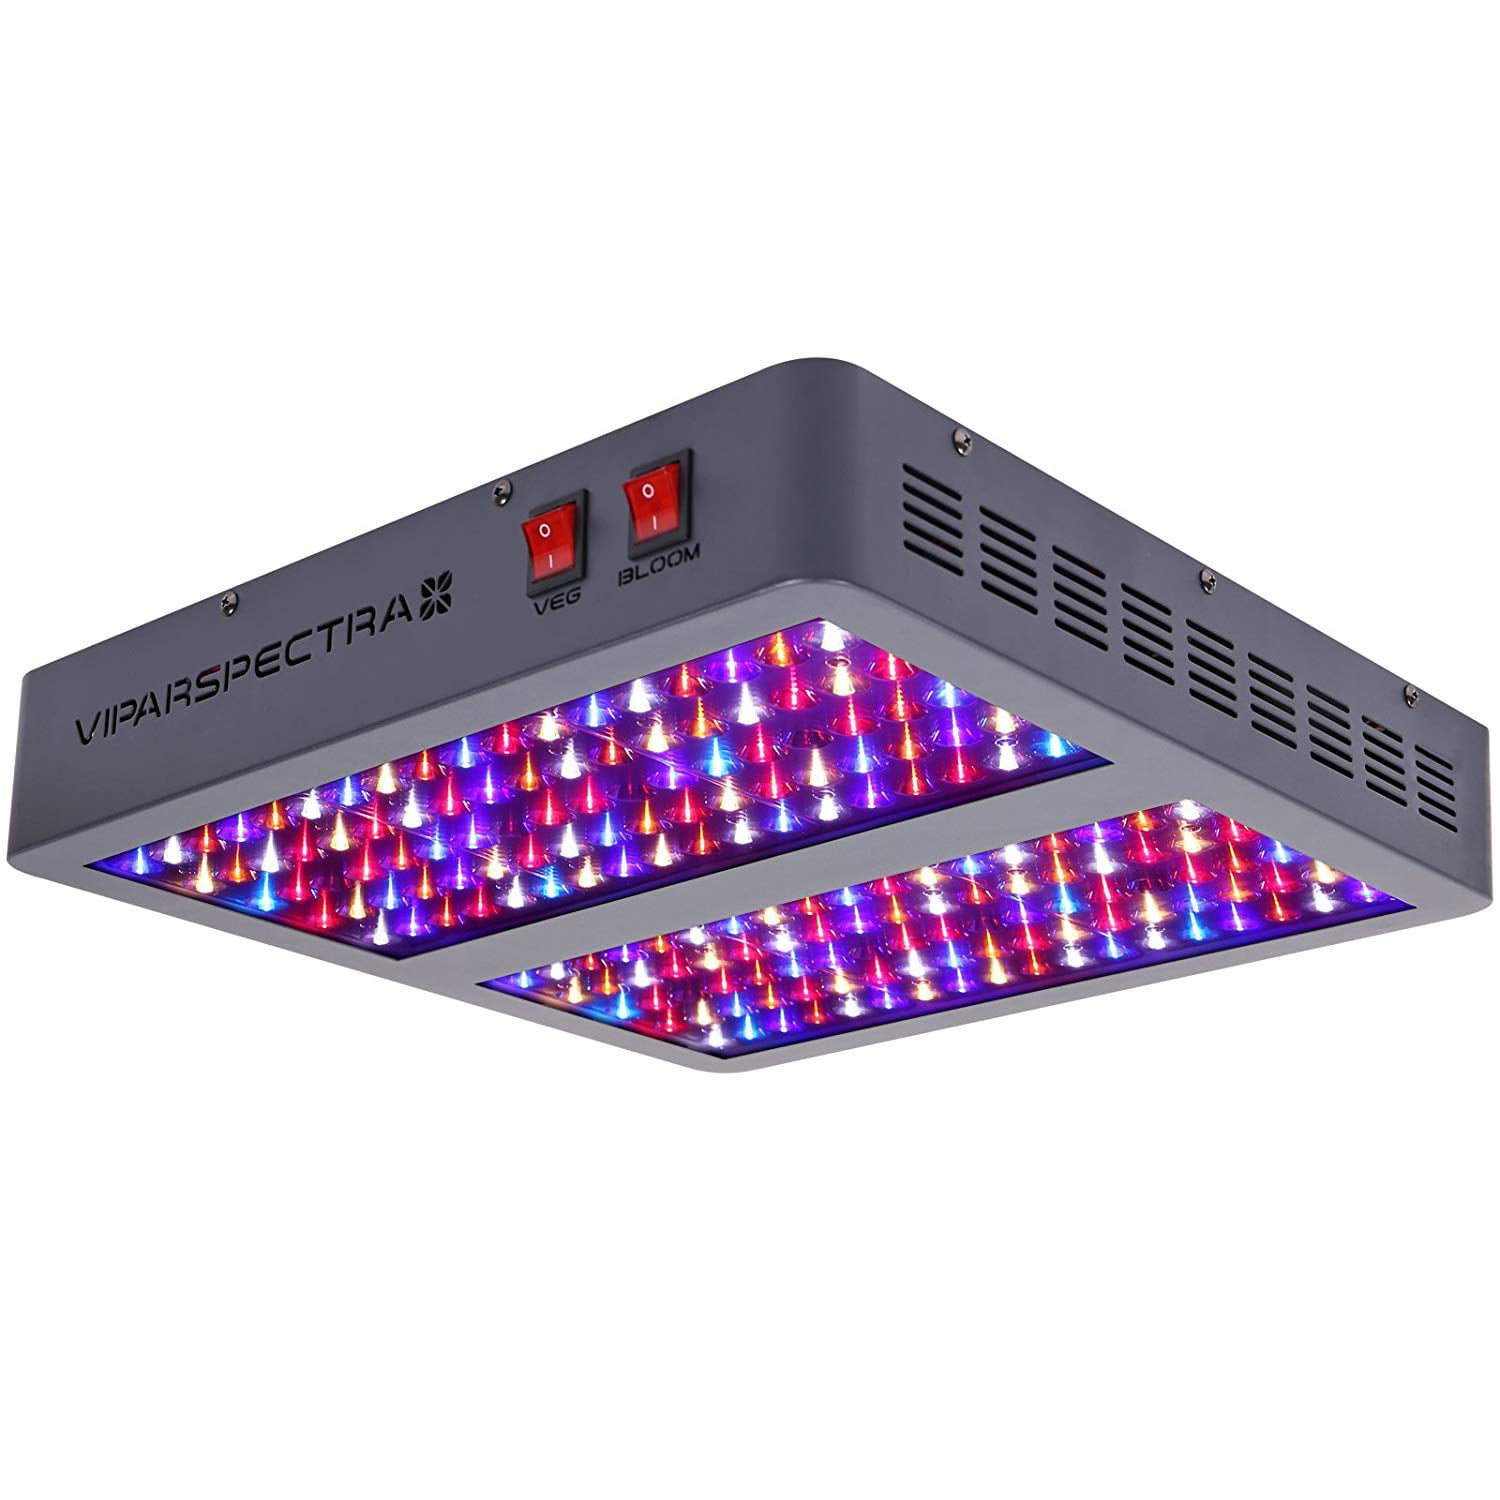 VIPARSPECTRA 900W LED Grow Light Full Spectrum Double Switch Plant Light for Indoor Plants Veg and Flower